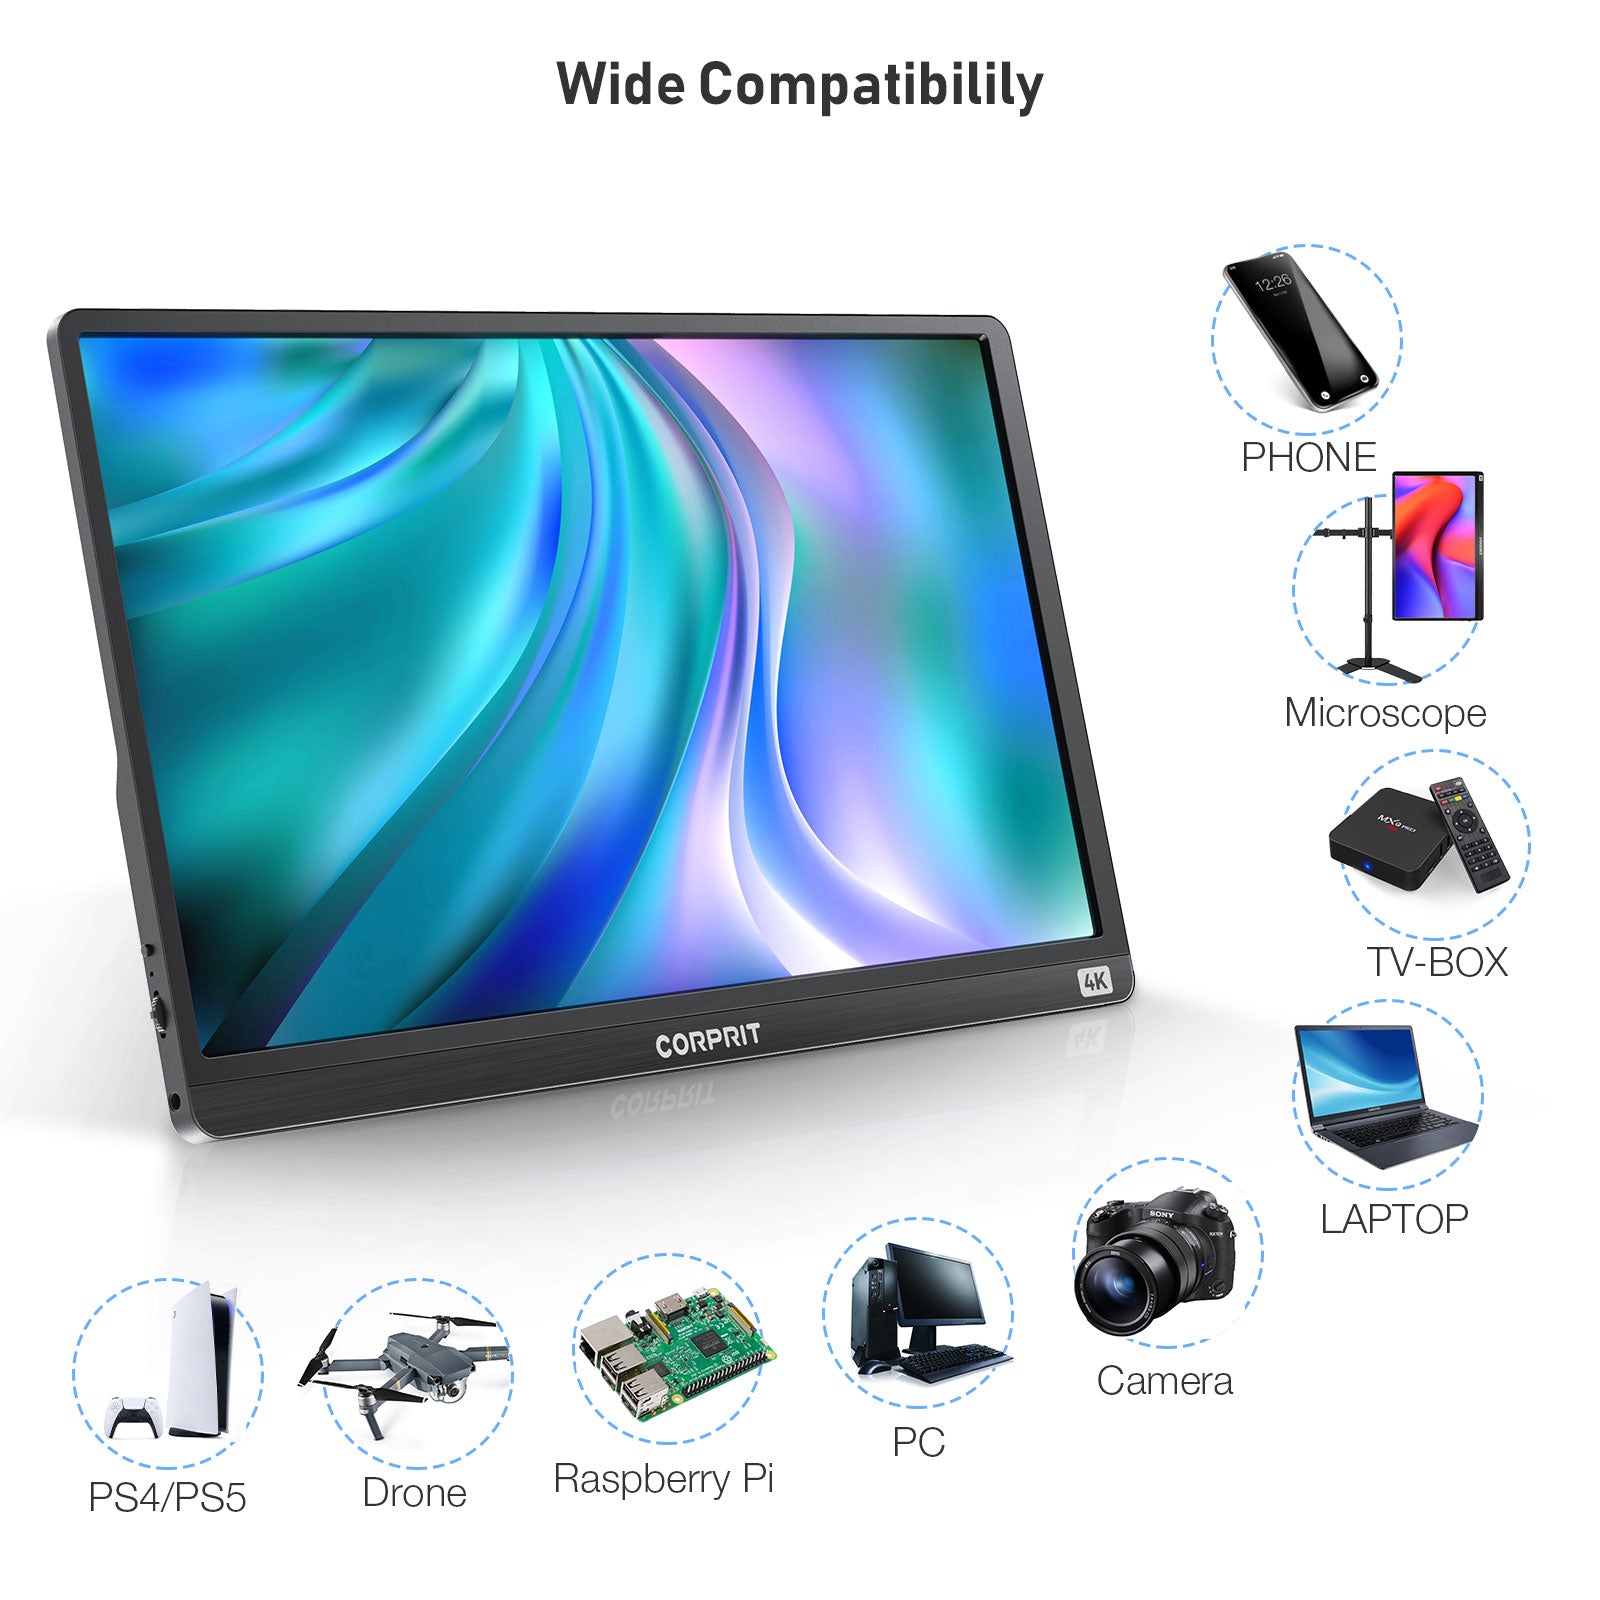 Corprit D159 4K 100% RGB Color Portable Monitor, 15.6 inch Corprit UHD IPS Portable Extendable Screen (Only available in Europe)